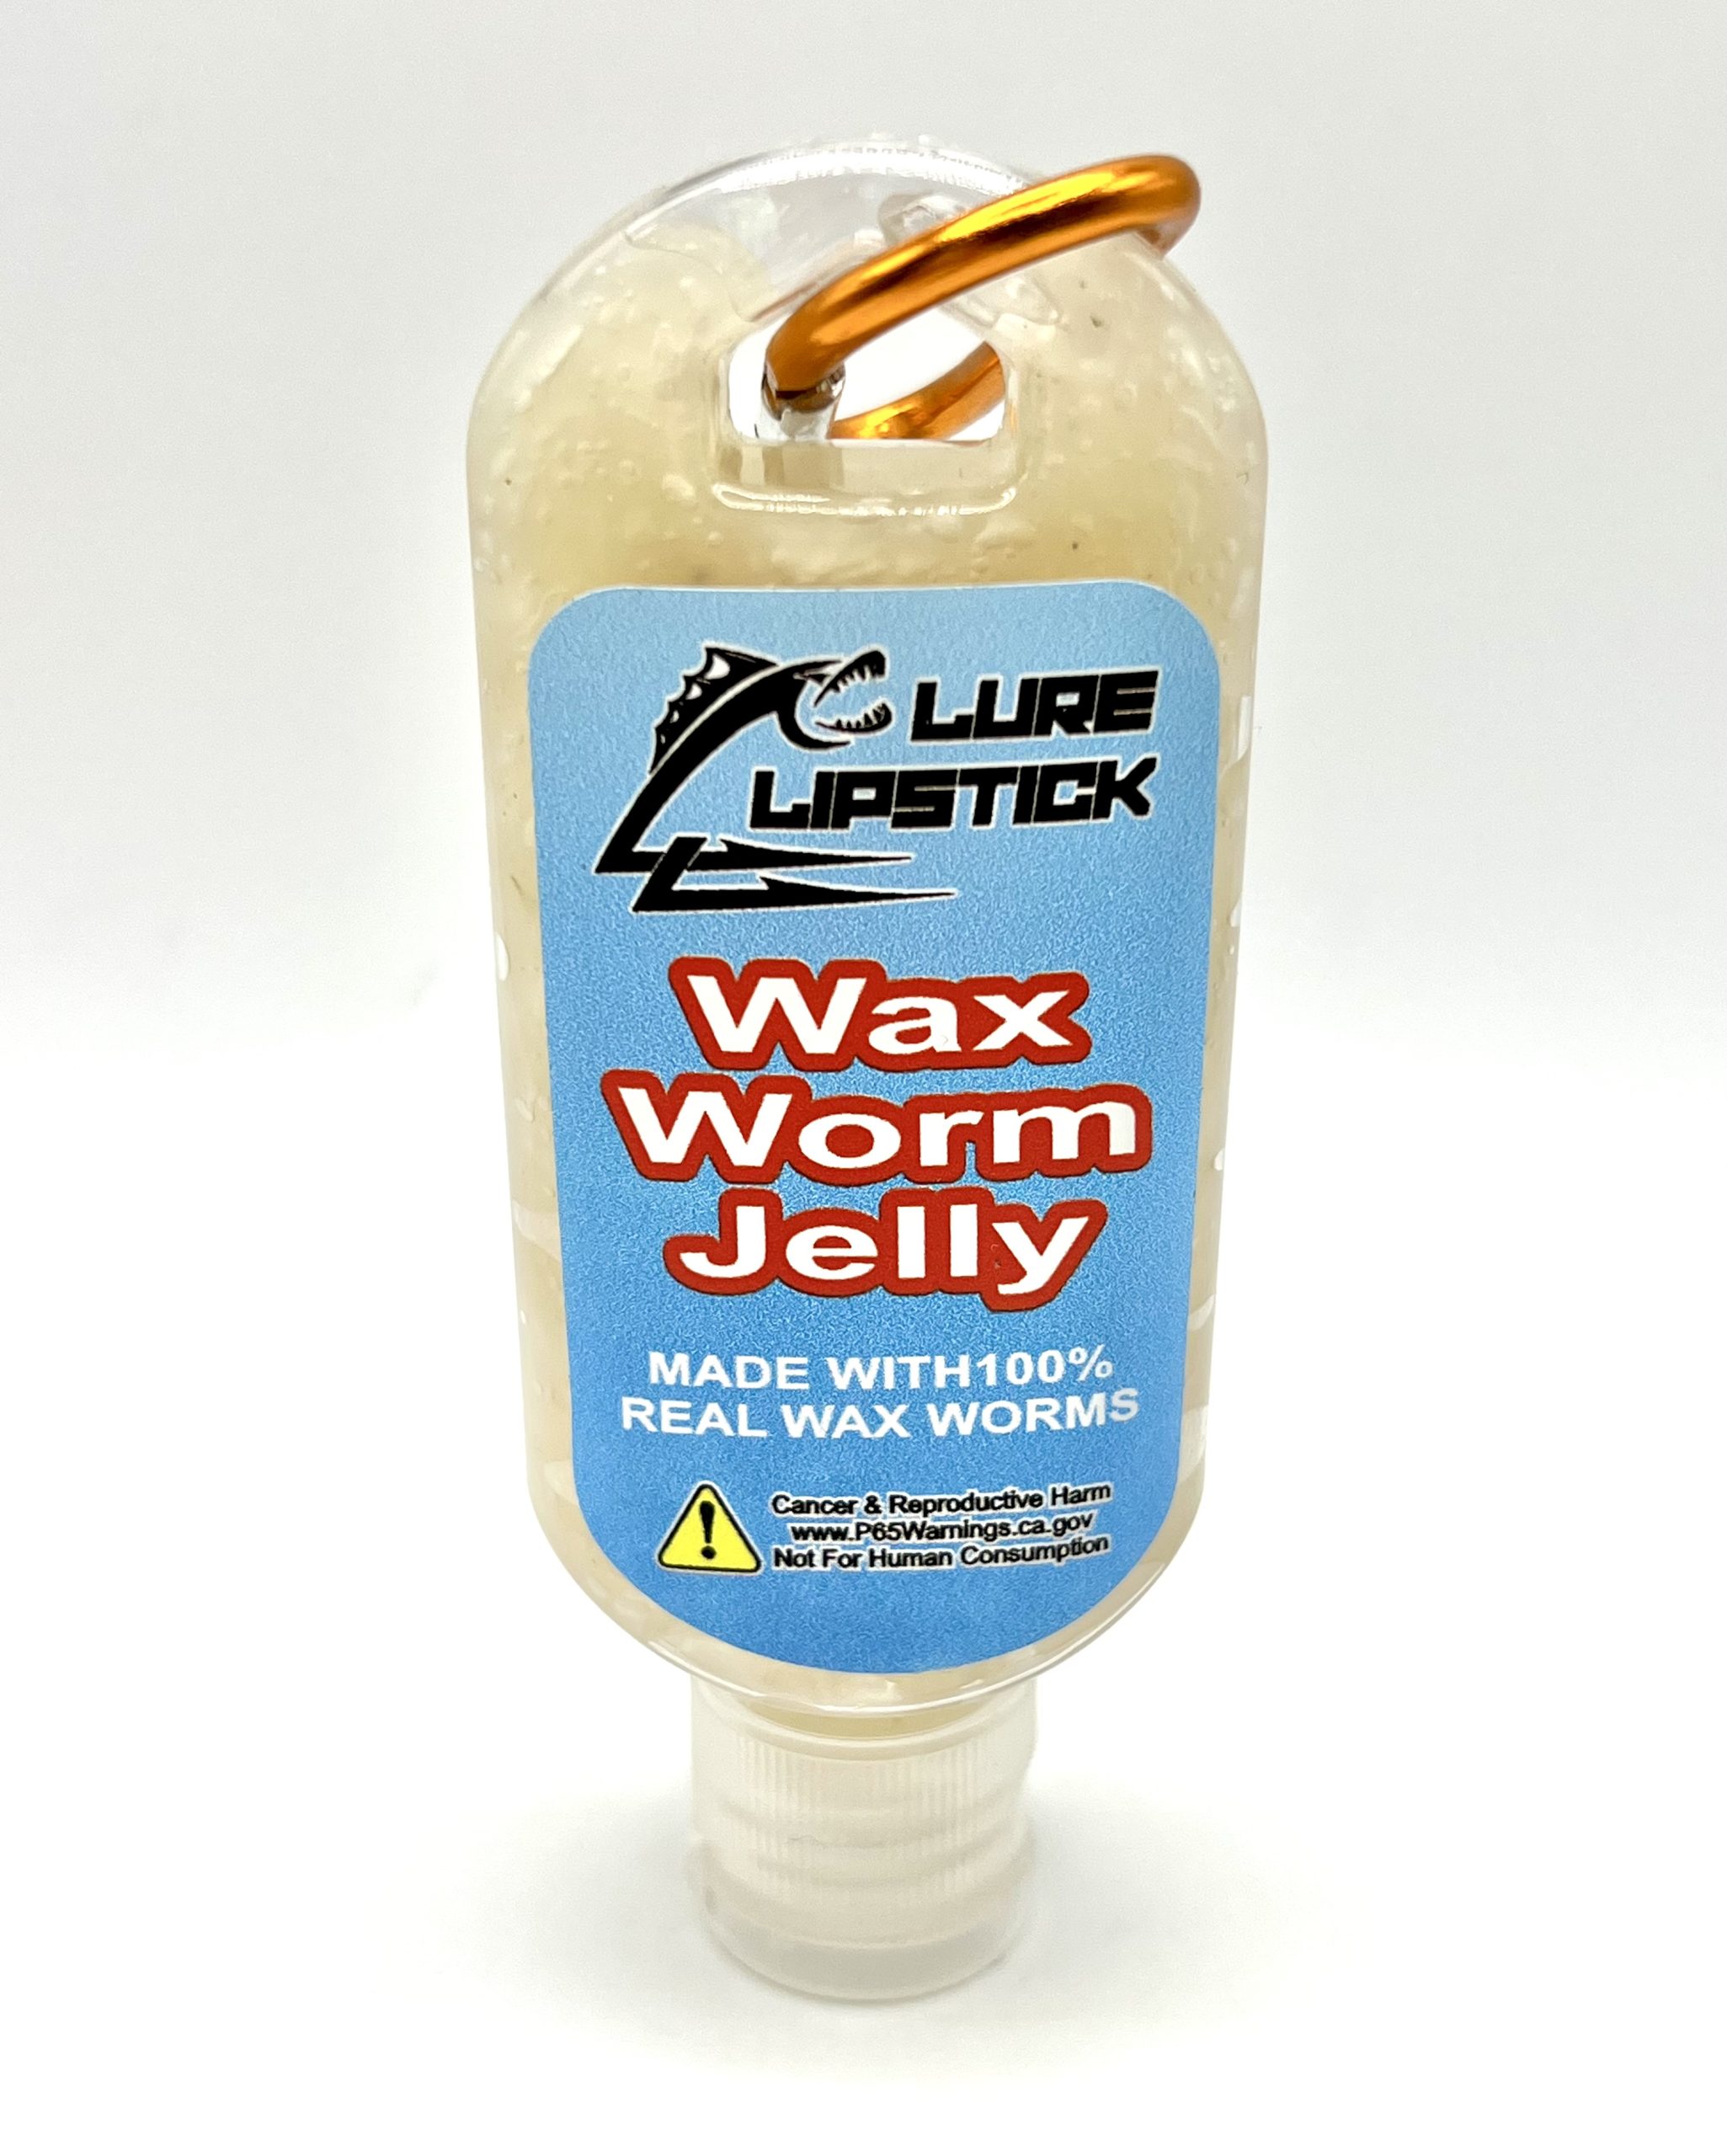 Lure Lipstick – Wax Worm Jelly – 3oz. Available in Squirt Top or Screw Top  Jar – Lure Lipstick